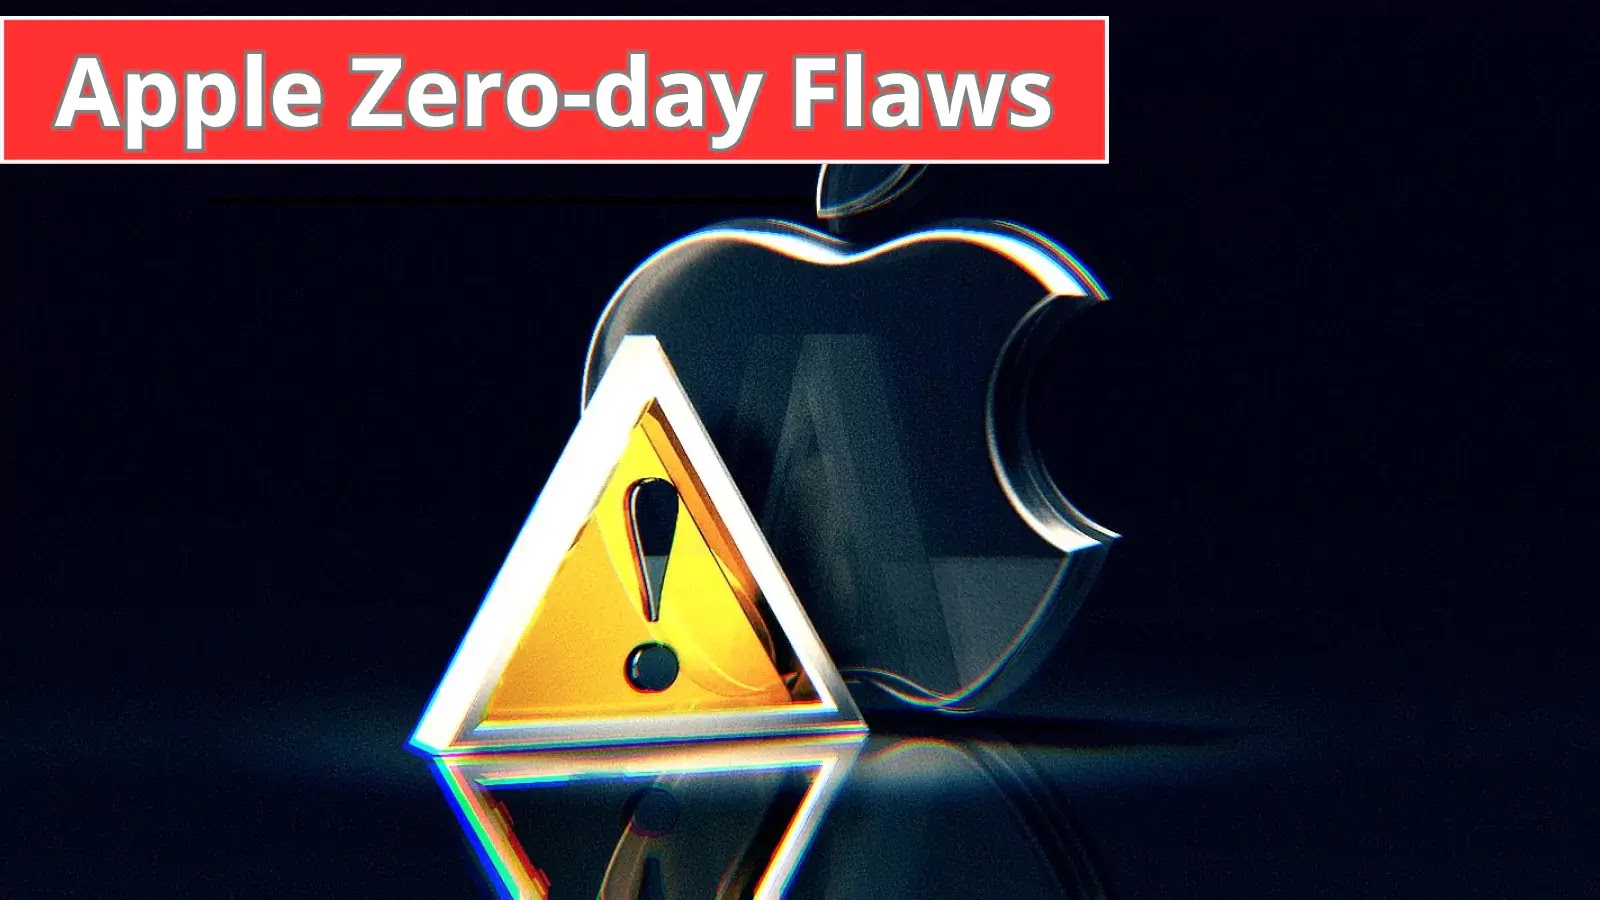 Apple Fixes Zero-day Vulnerabilities Exploited To Attack iPhones, Macs, and iPads